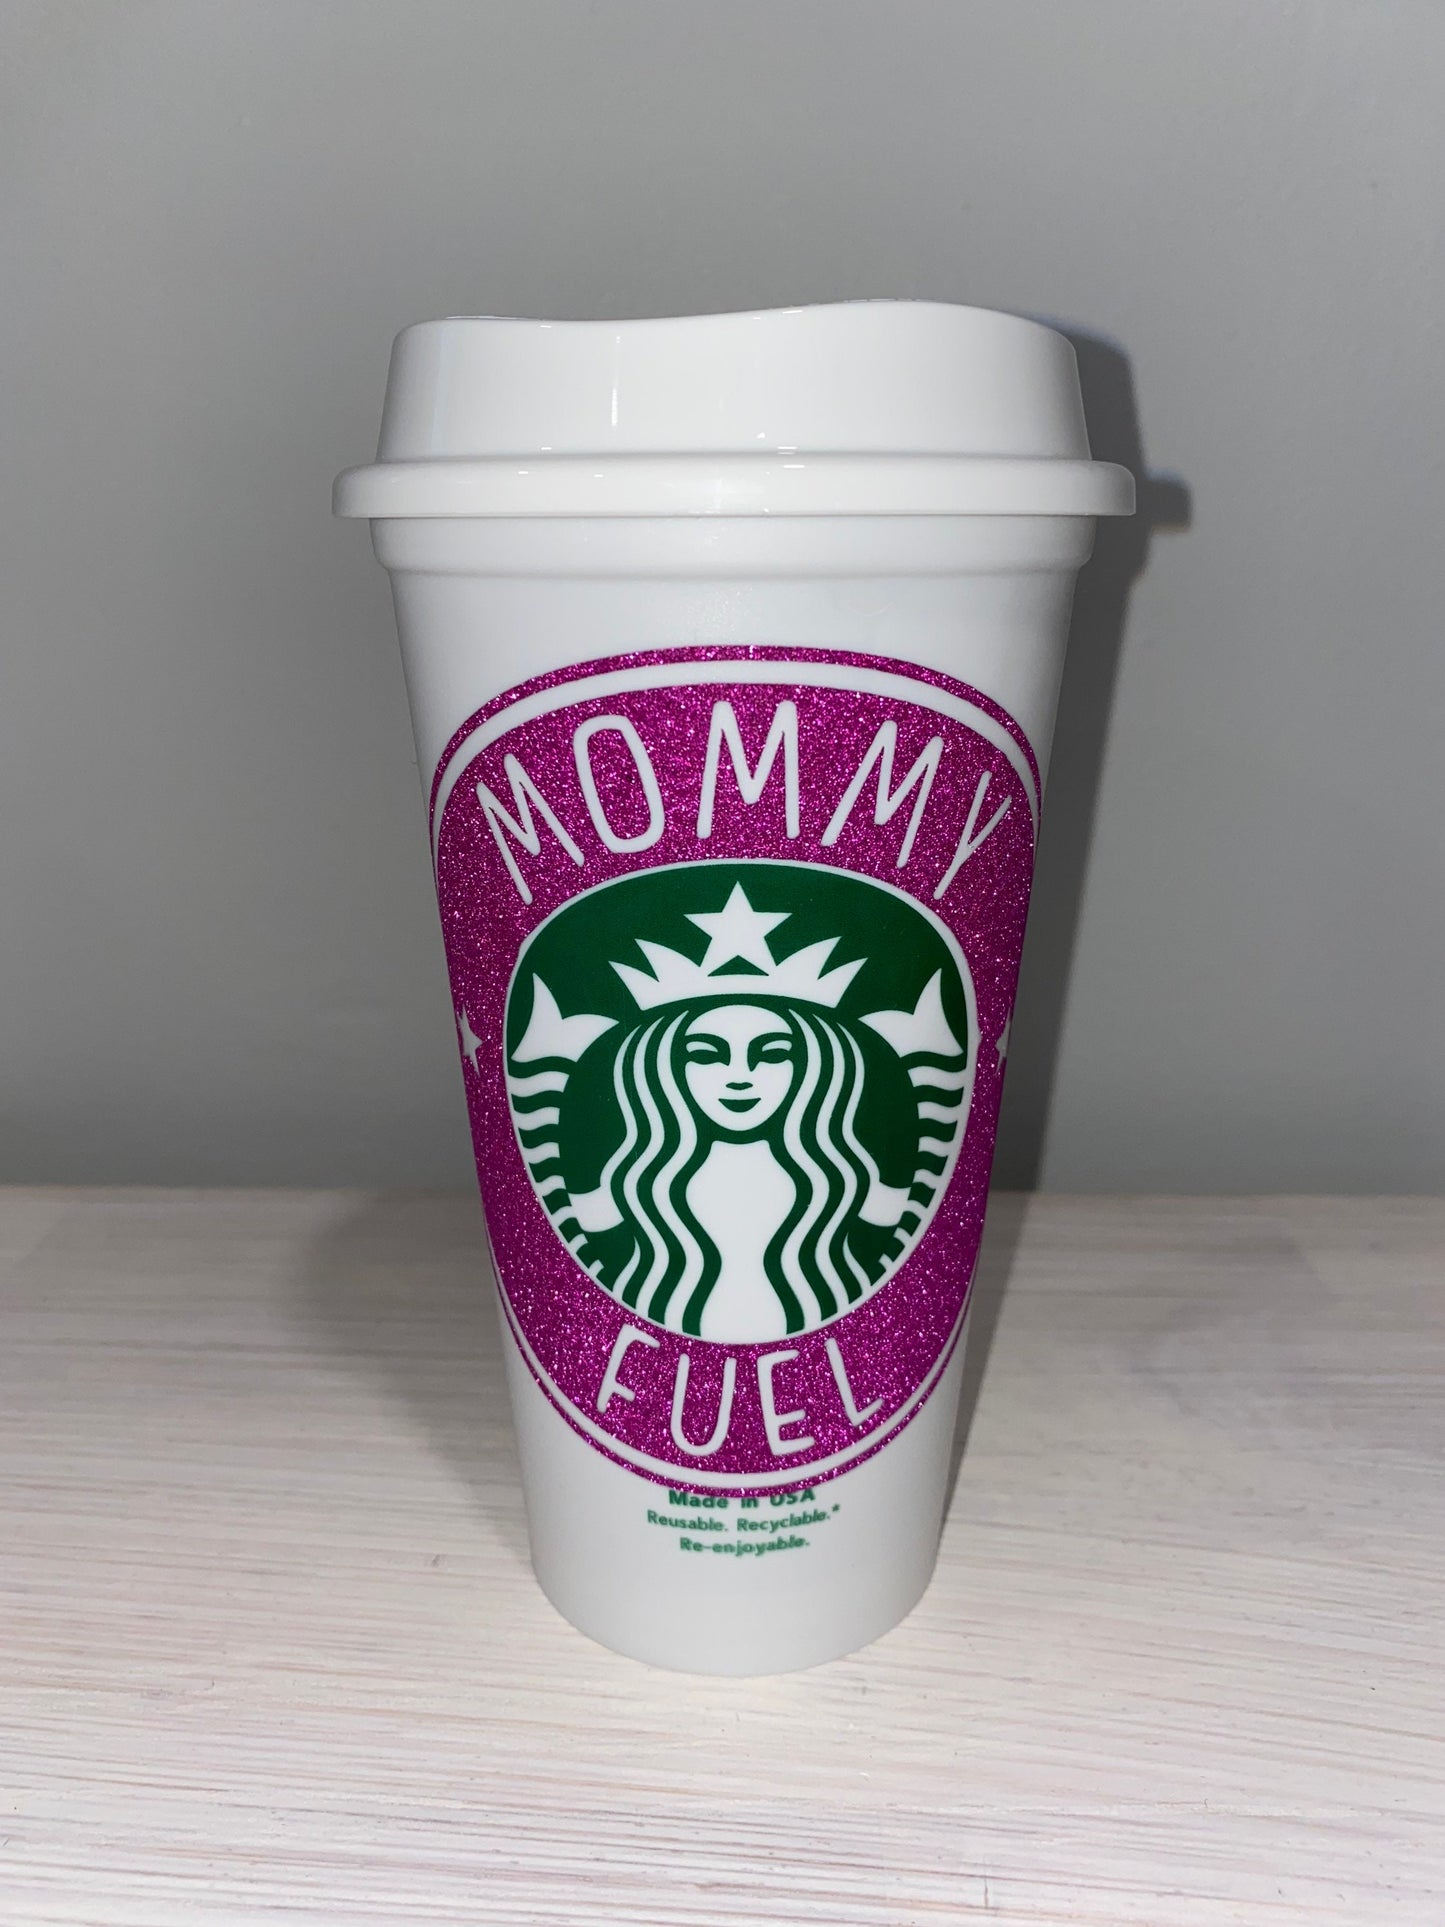 Mommy Fuel Coffee Cup, Mom Cup, Starbucks Cup, Reusable Coffee Cup, Mother’s Say cup